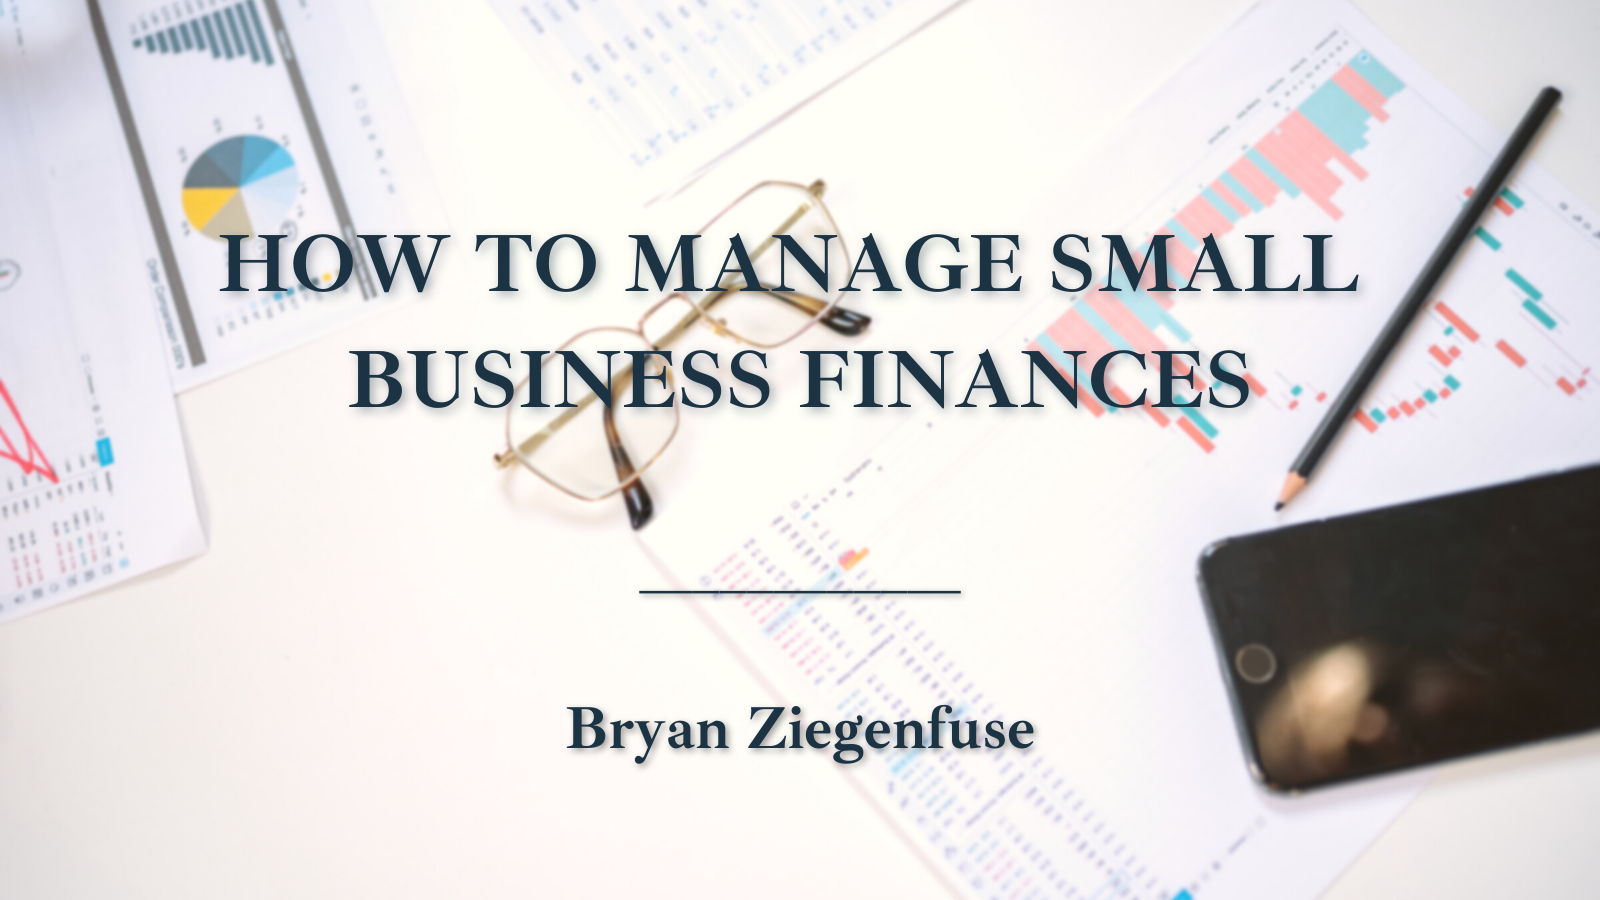 an
a
HOW TO MANAGE SMALL
PUR FINANCES

  

Bryan Ziegenfuse